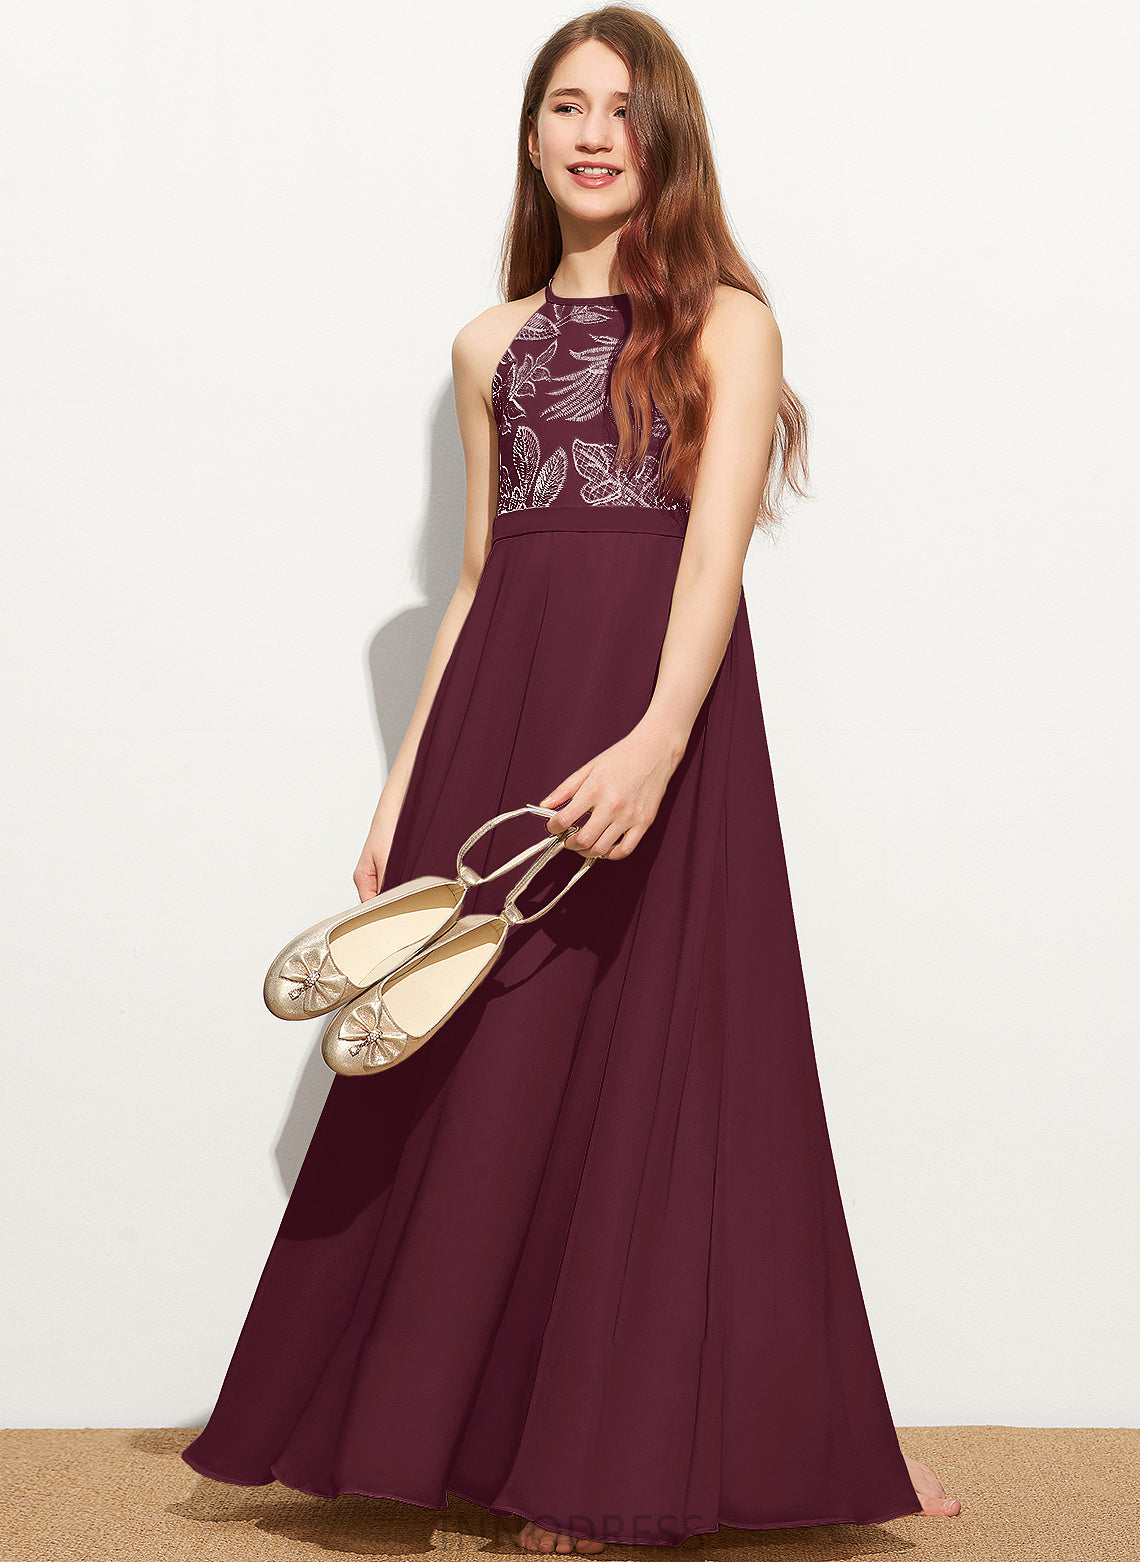 A-Line Chiffon Junior Bridesmaid Dresses Floor-Length Lace Scoop Bow(s) Neck With Iris